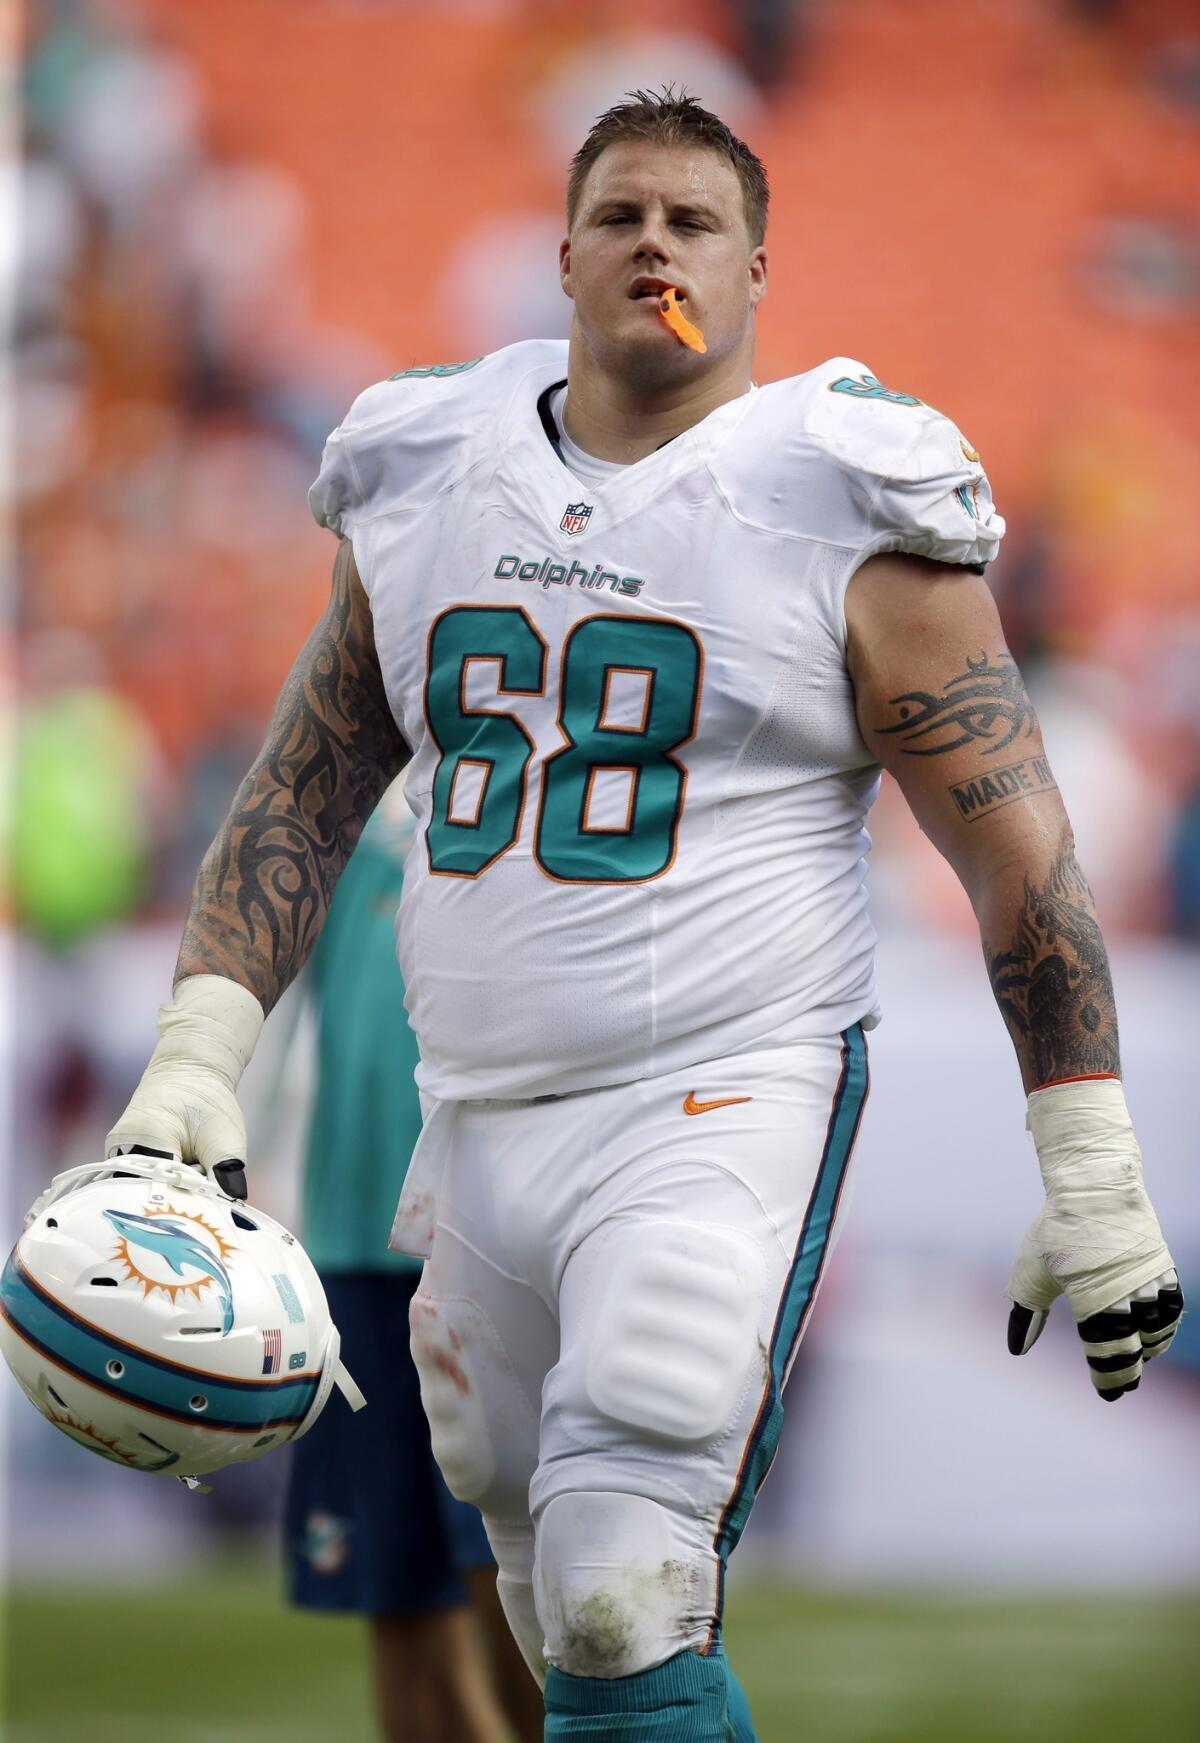 Miami Dolphins offensive lineman Richie Incognito remains under paid suspension as the NFL continues its investigation involving his alleged role in the team's bullying scandal.